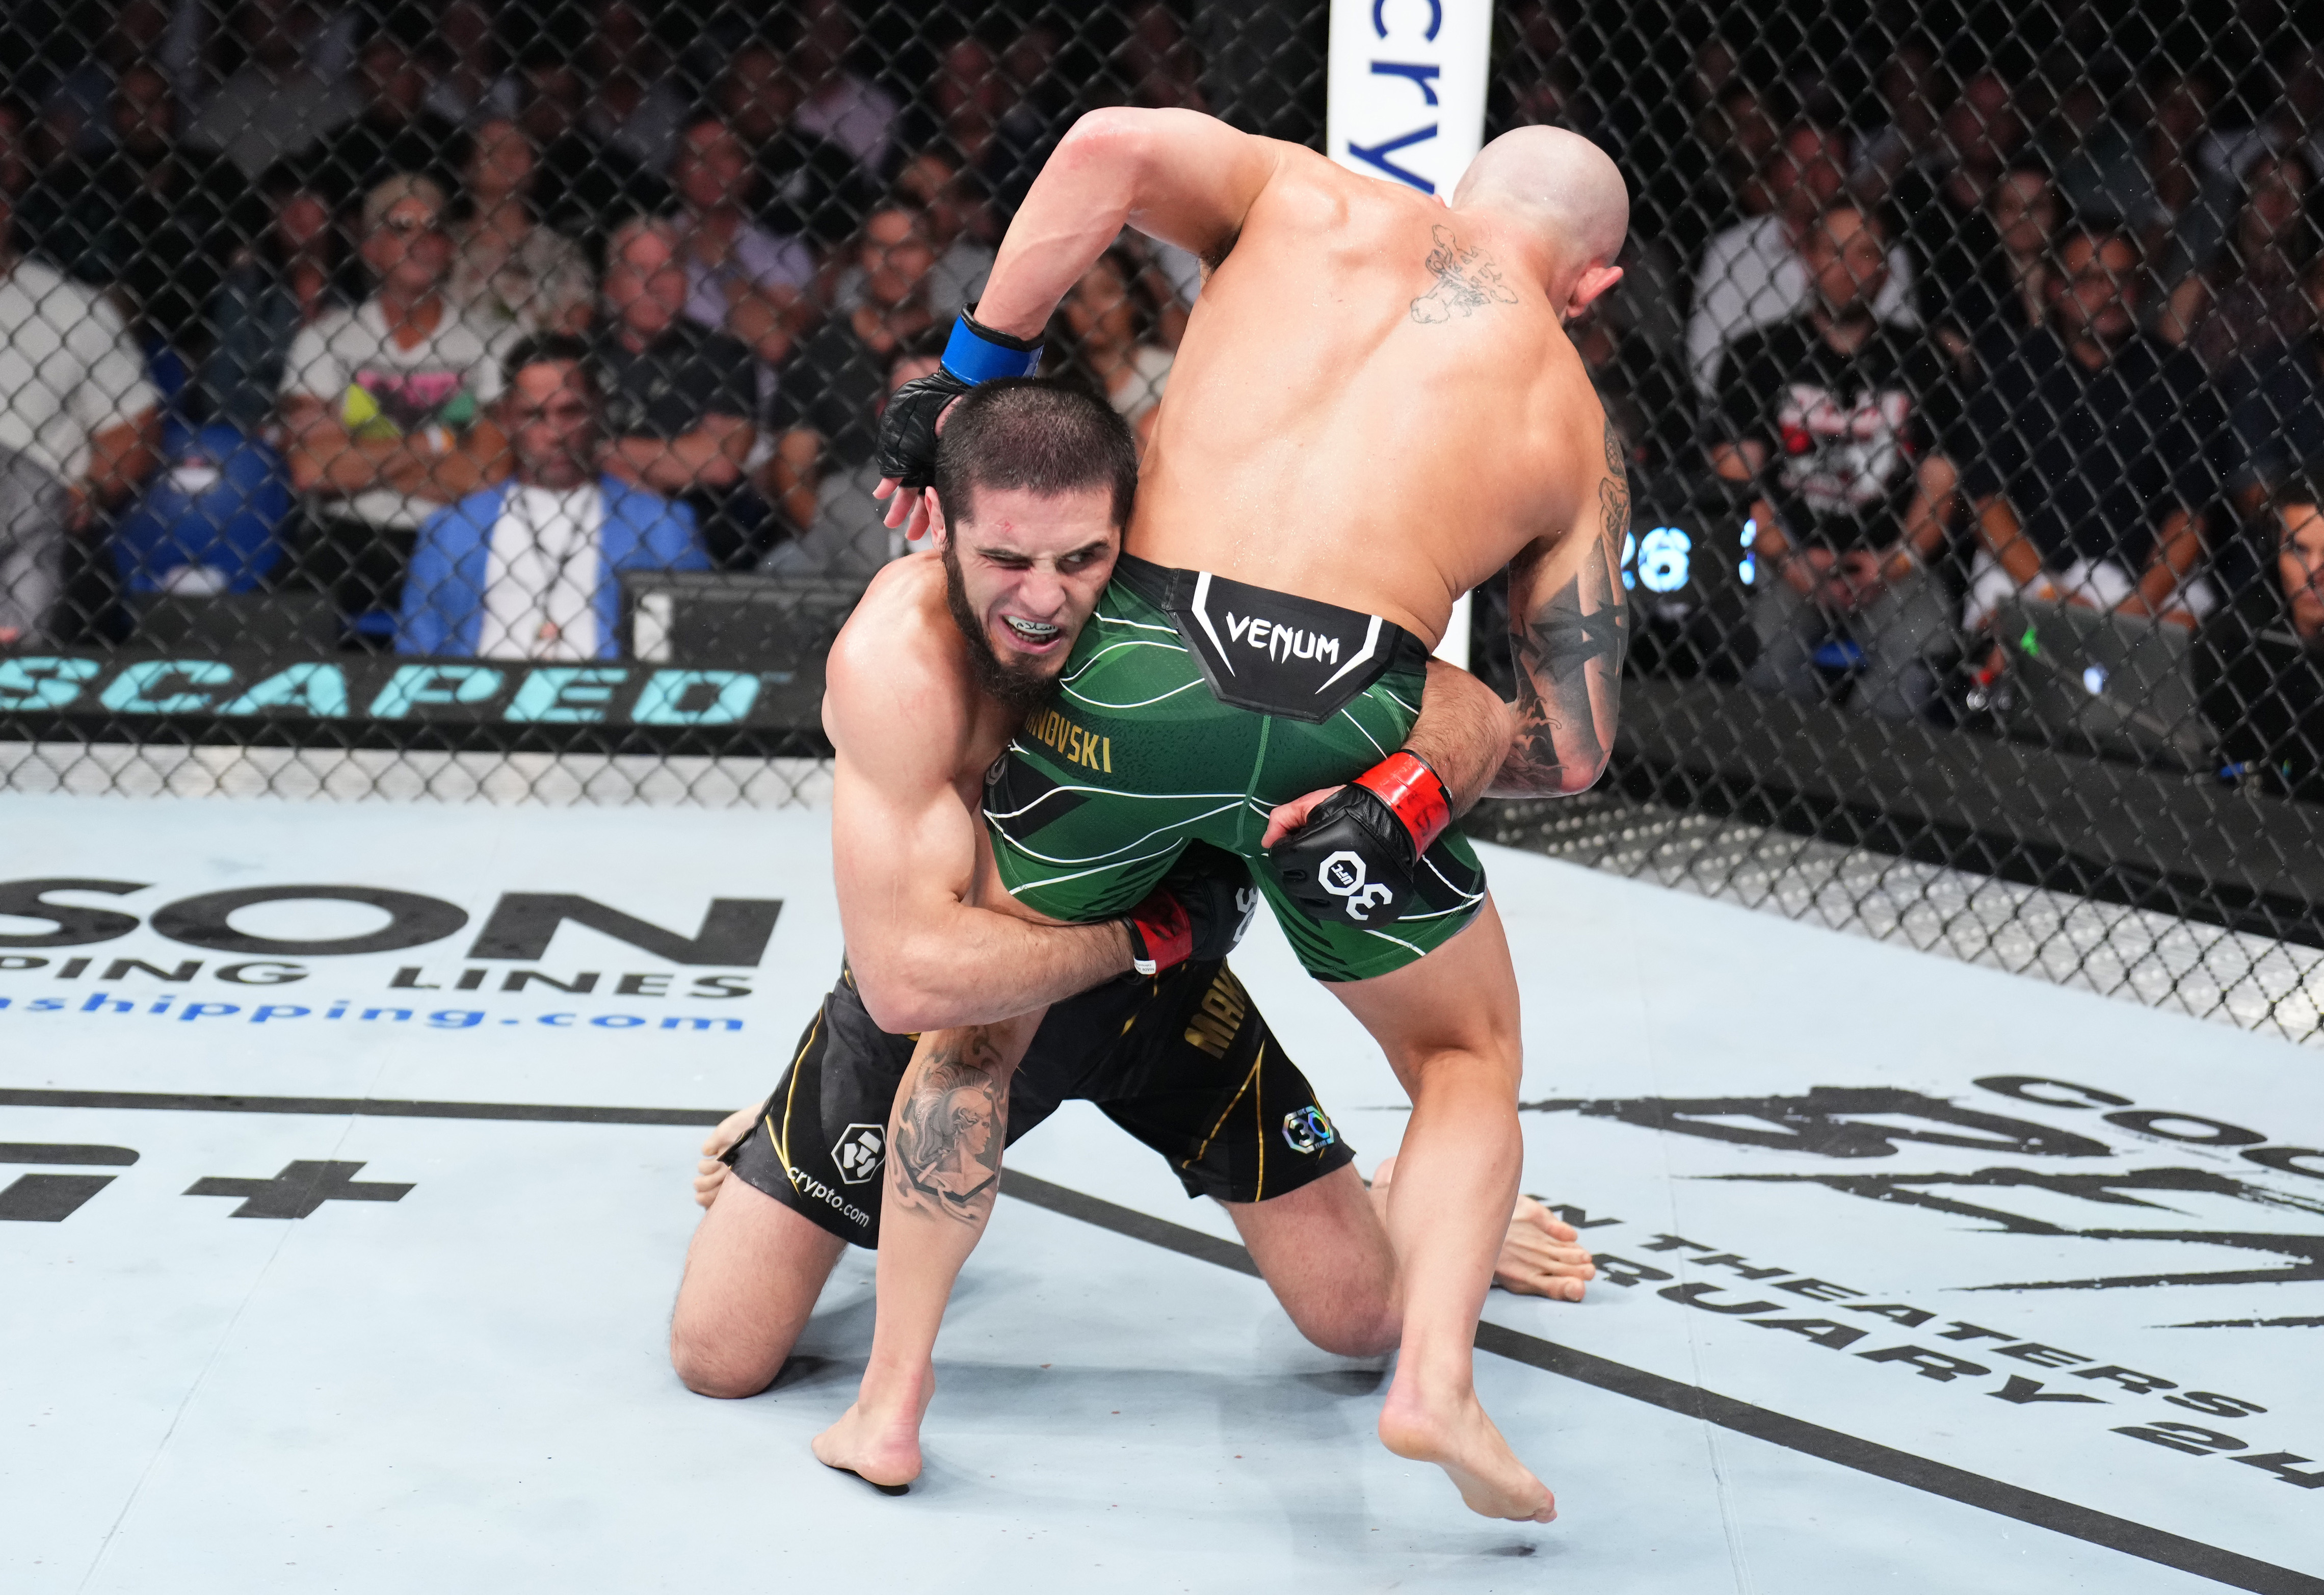 Islam Makhachev defeated Alexander Volkanovski to retain his lightweight title in the UFC 284 main event